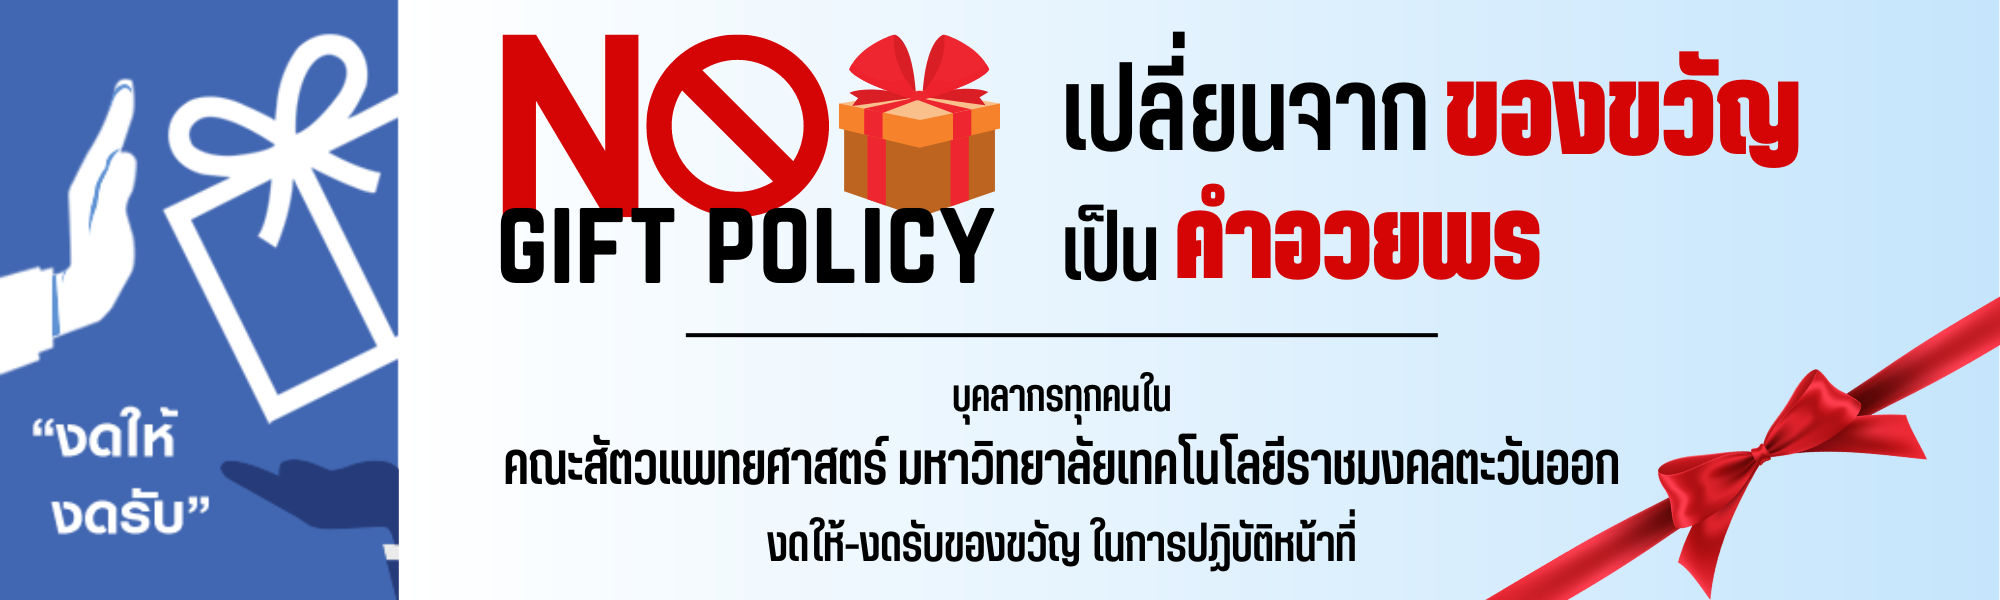 NO GIFT POLICY (2)